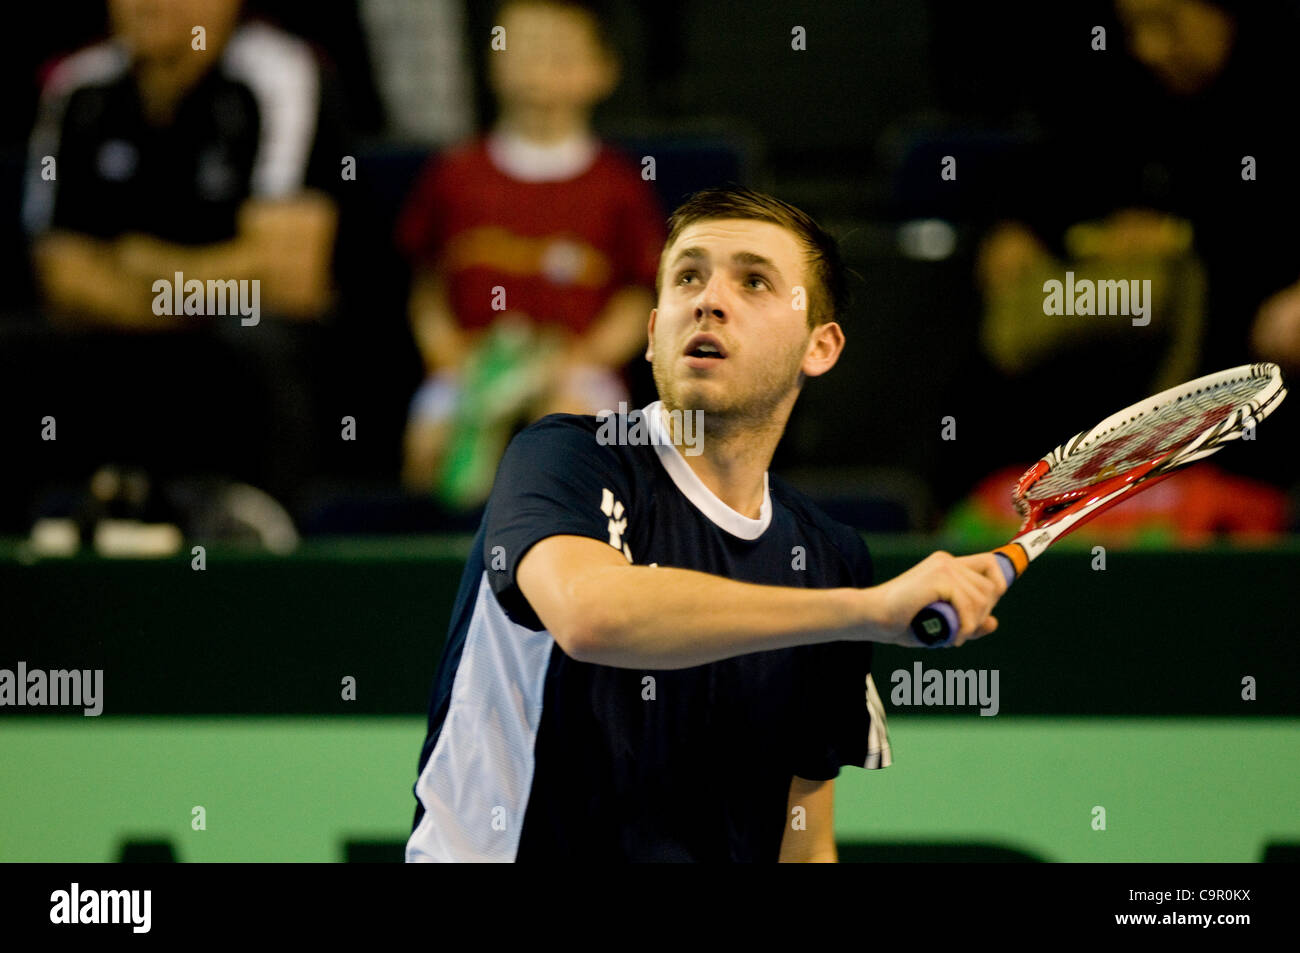 Dan Evans and Lucas Lacko contest the first match in the Davis cup by BNP Paribas, Great Britain v Slovak Republic tie at Glasgows' Braehead Arena. Stock Photo